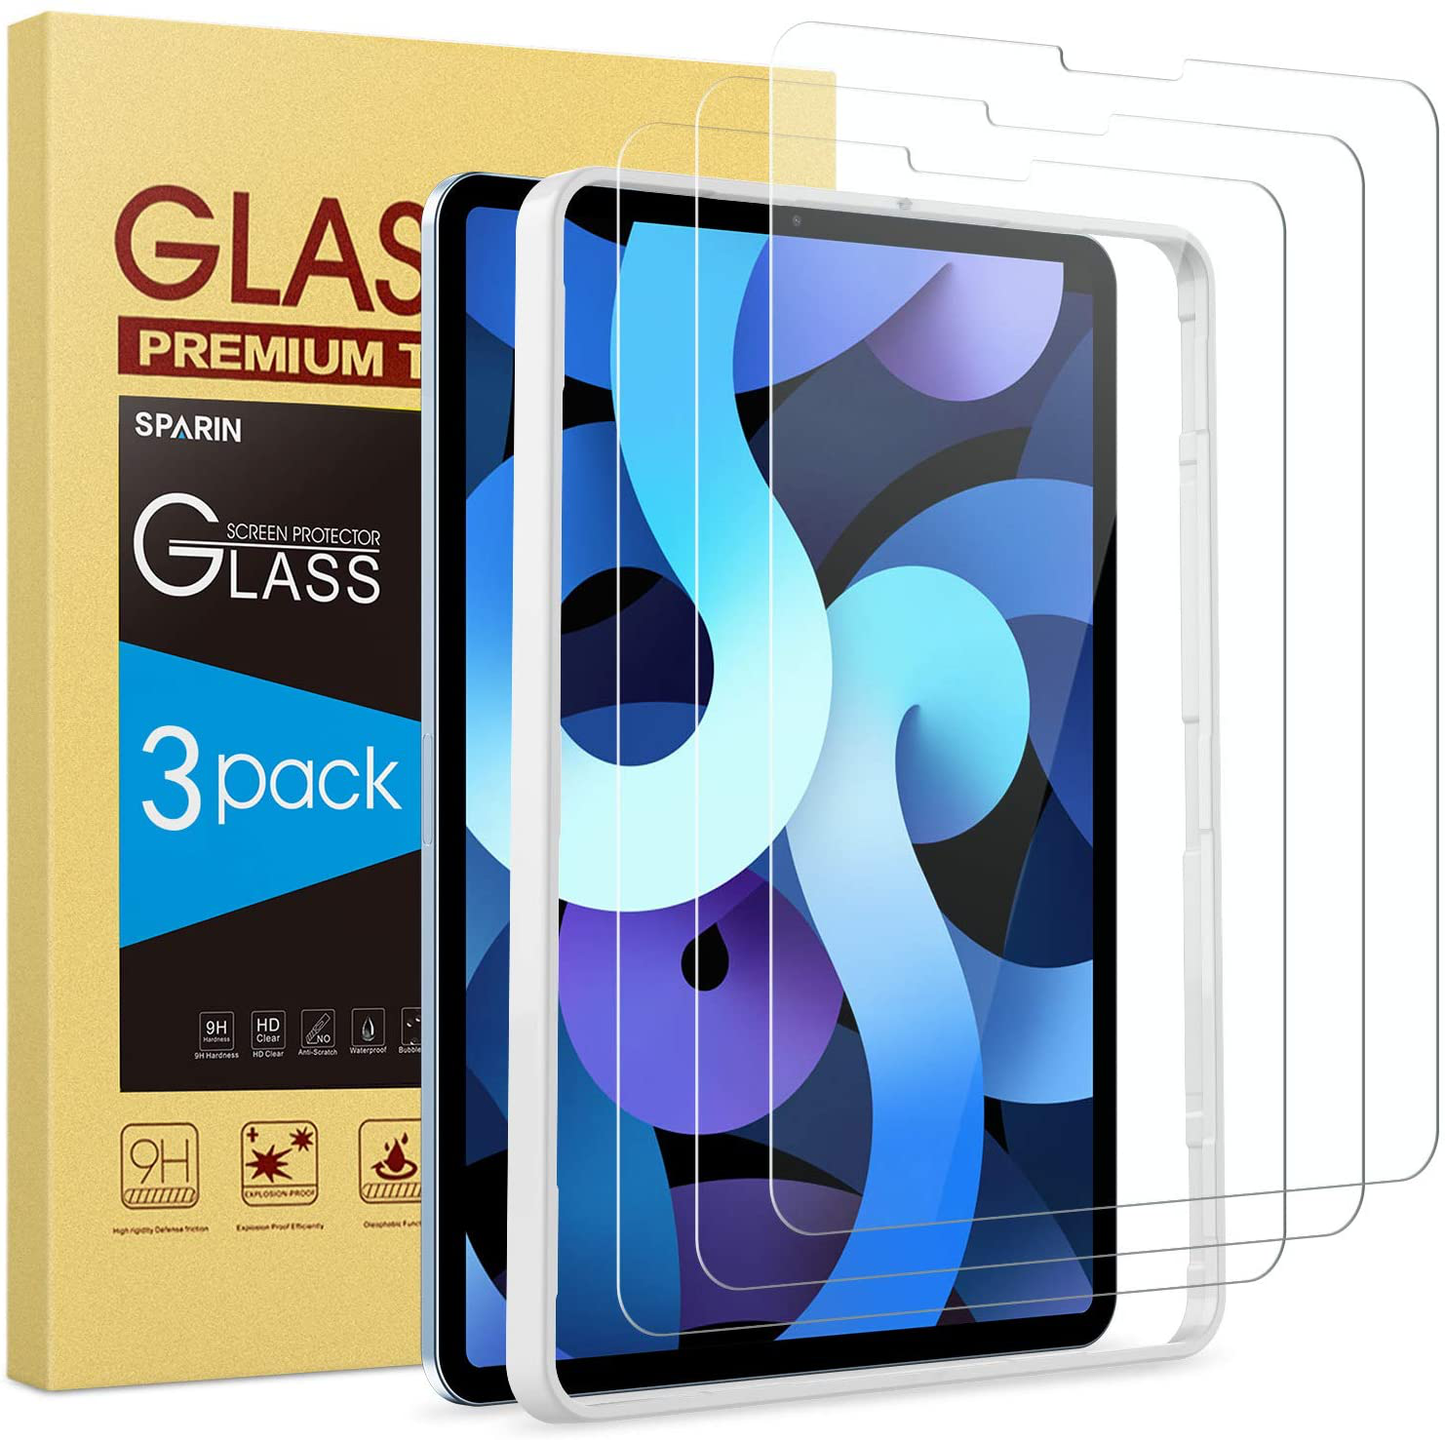 SPARIN [3 Pack] Screen Protector Compatible with iPad Air 4 / iPad Pro 11 inch, Tempered Glass Compatible with iPad Air 4th Generation 10.9 inch with Alignment Frame